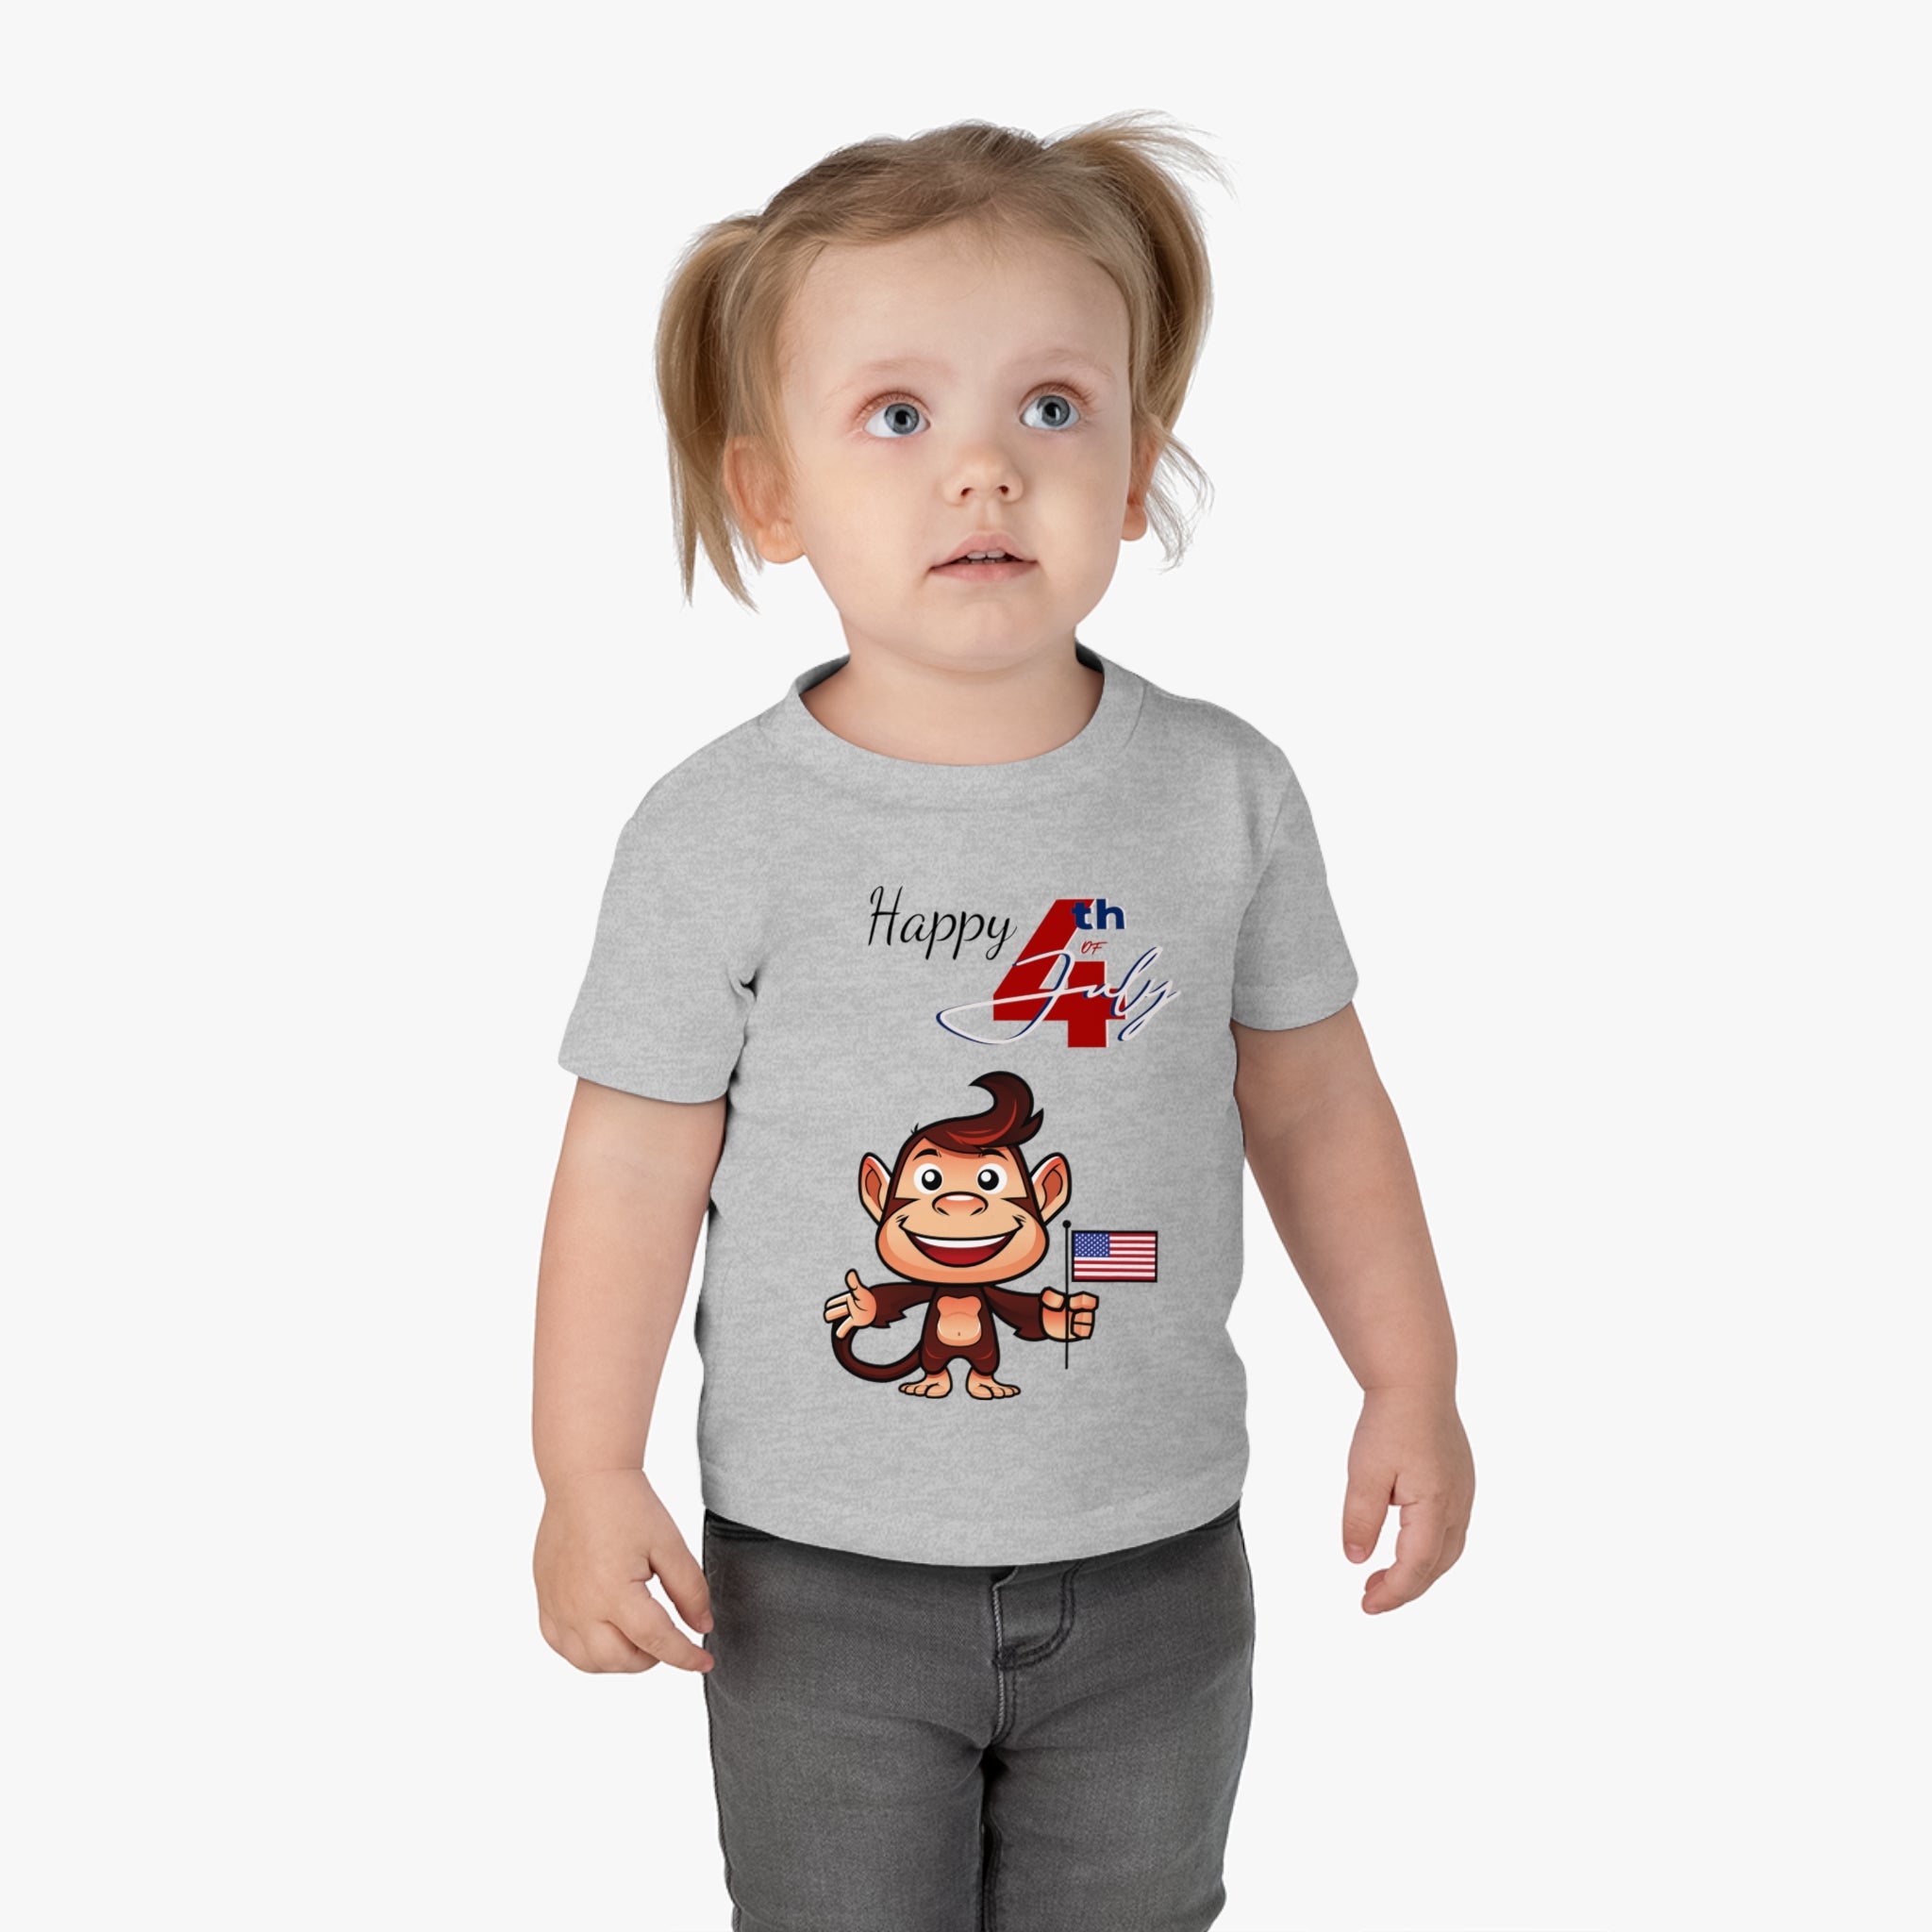 Happy 4th of July Cute Monkey design Infant Shirt, Baby Tee, Infant Tee